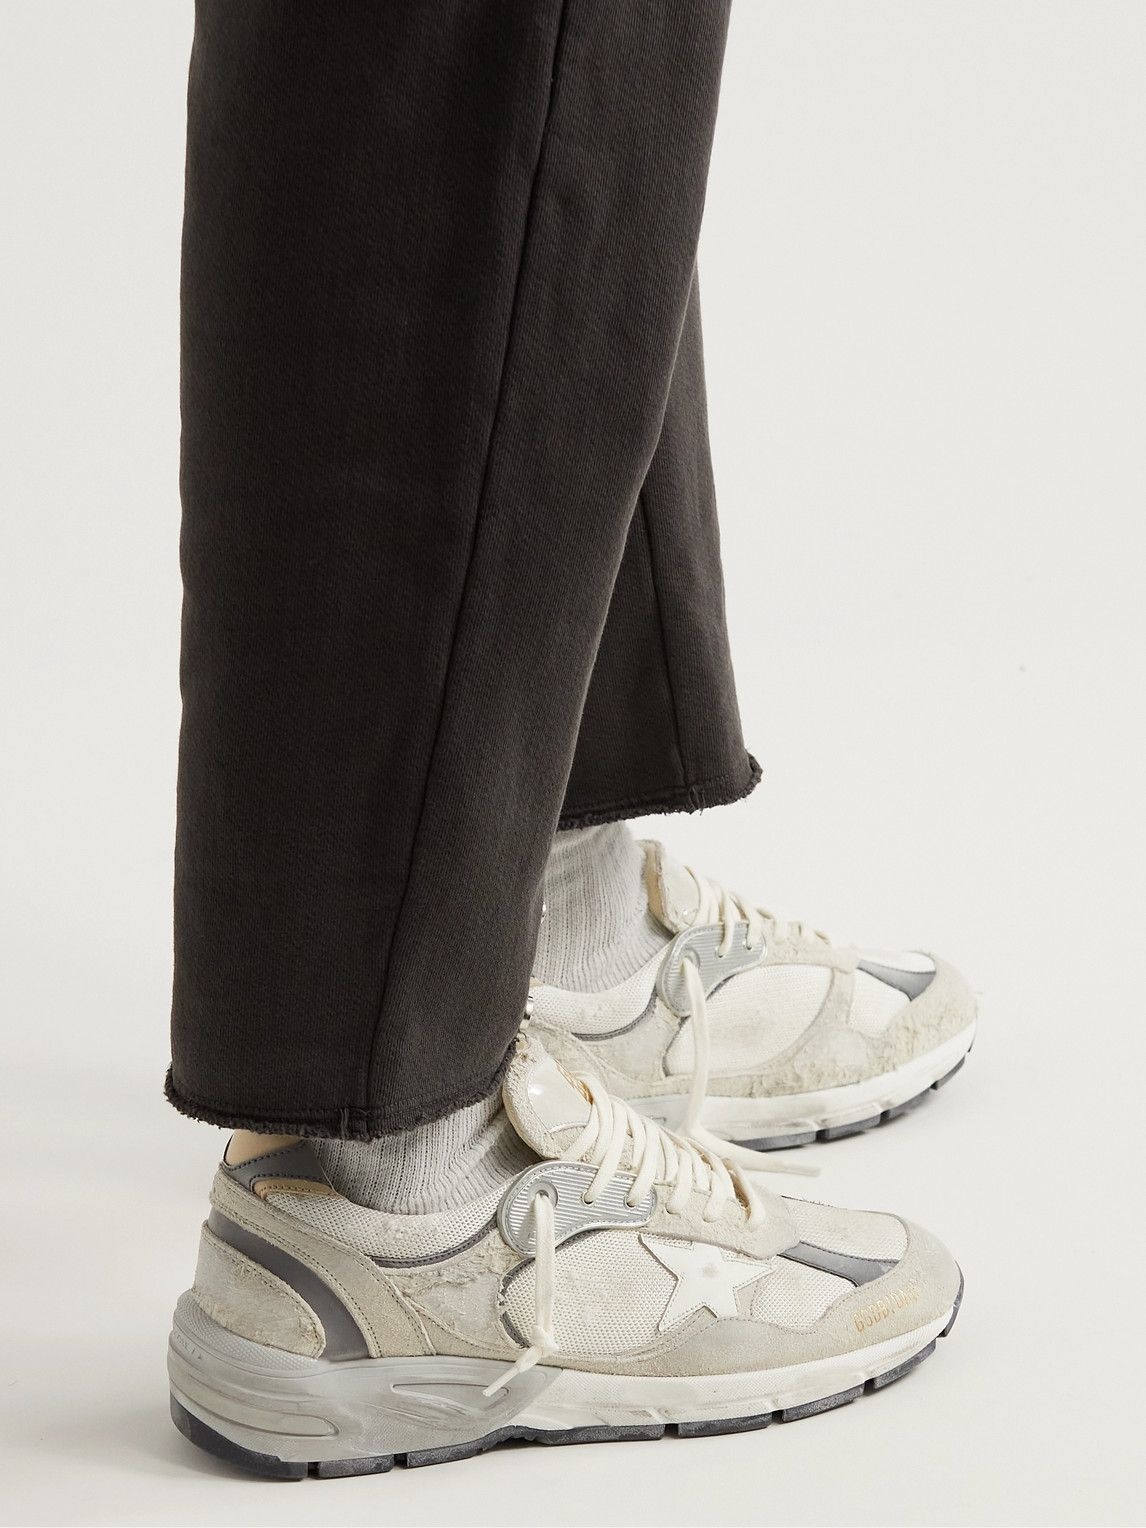 Golden Goose - Dad-Star Distressed Leather-Trimmed Suede and Mesh Sneakers  - White Golden Goose Deluxe Brand